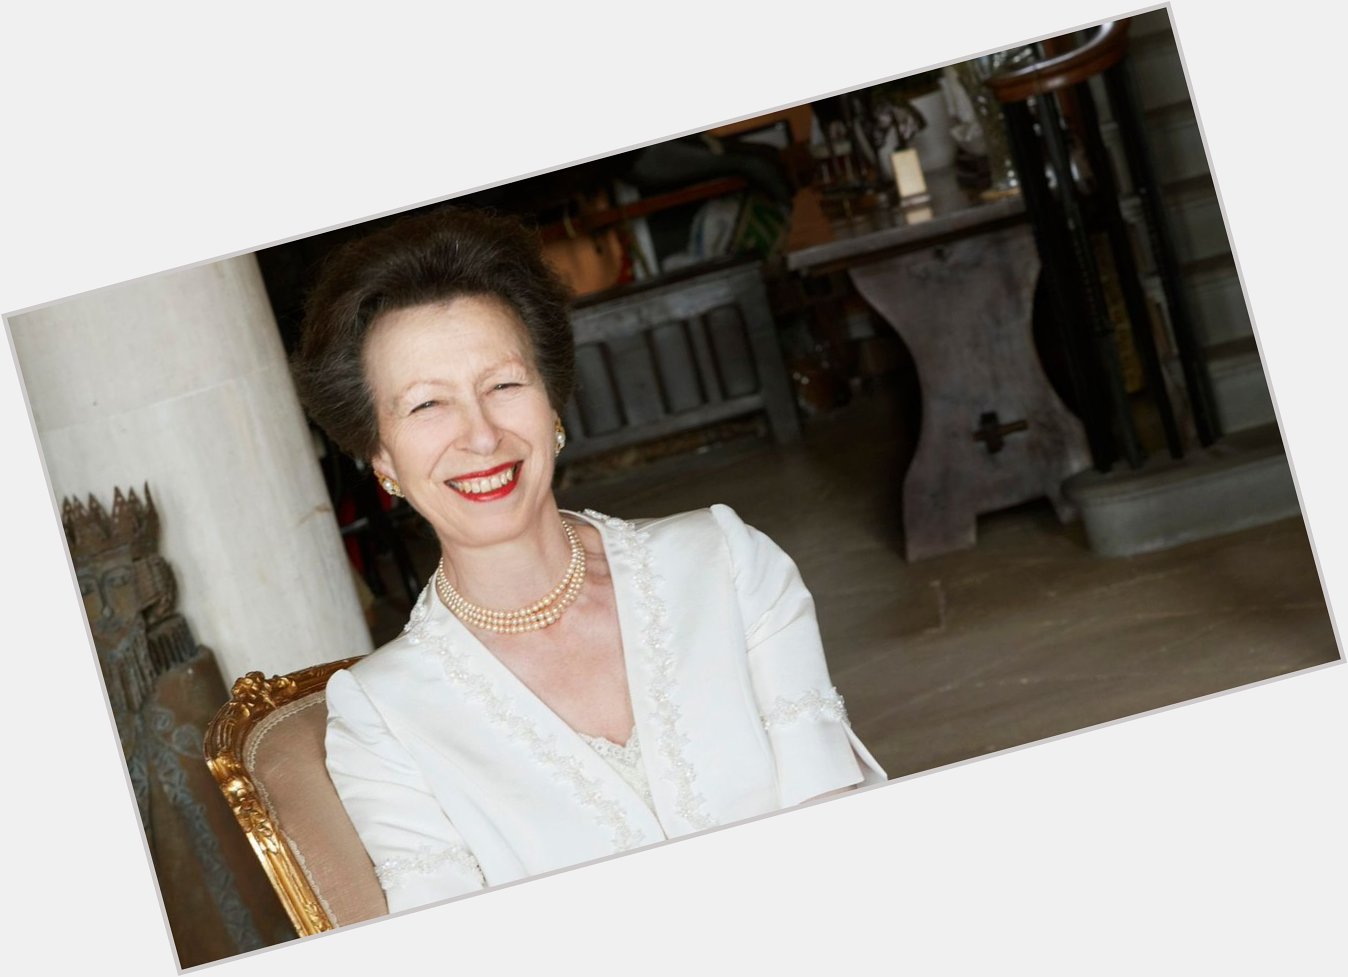 Room Rater Happy Birthday. Canadian Rater s Favourite Royal,  Princess Anne, turns 70 today. 10/10. 